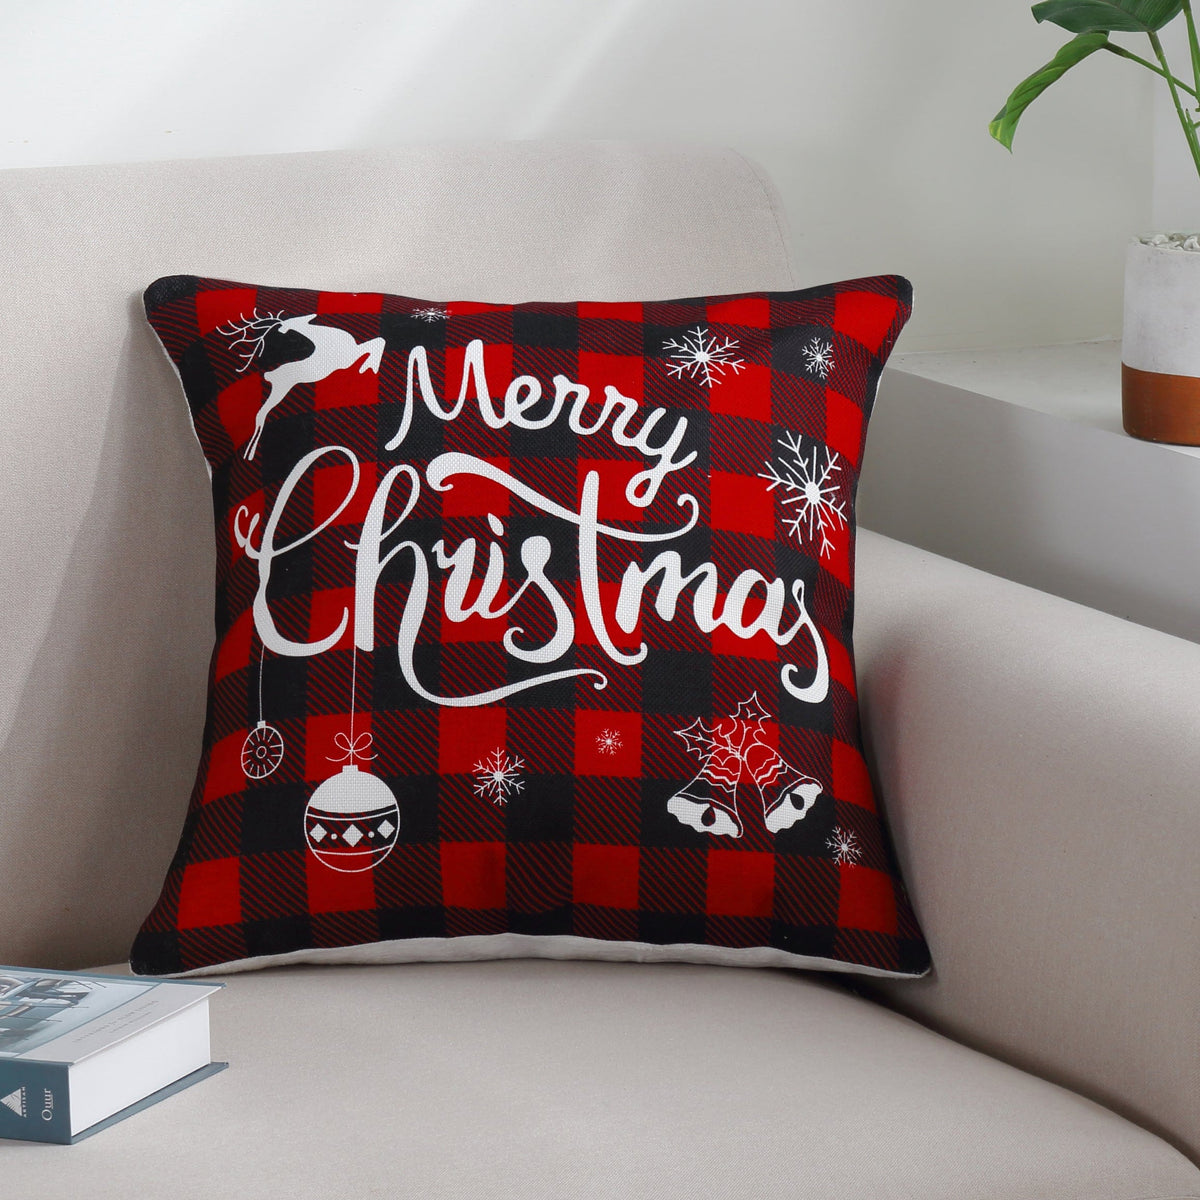 Marina Decoration Christmas Rich Printed Cushion Cover Set Throw Square Xmas Pillow Covers with Hidden Zipper Pack of 4, Rustic Red Black Plaid Pattern